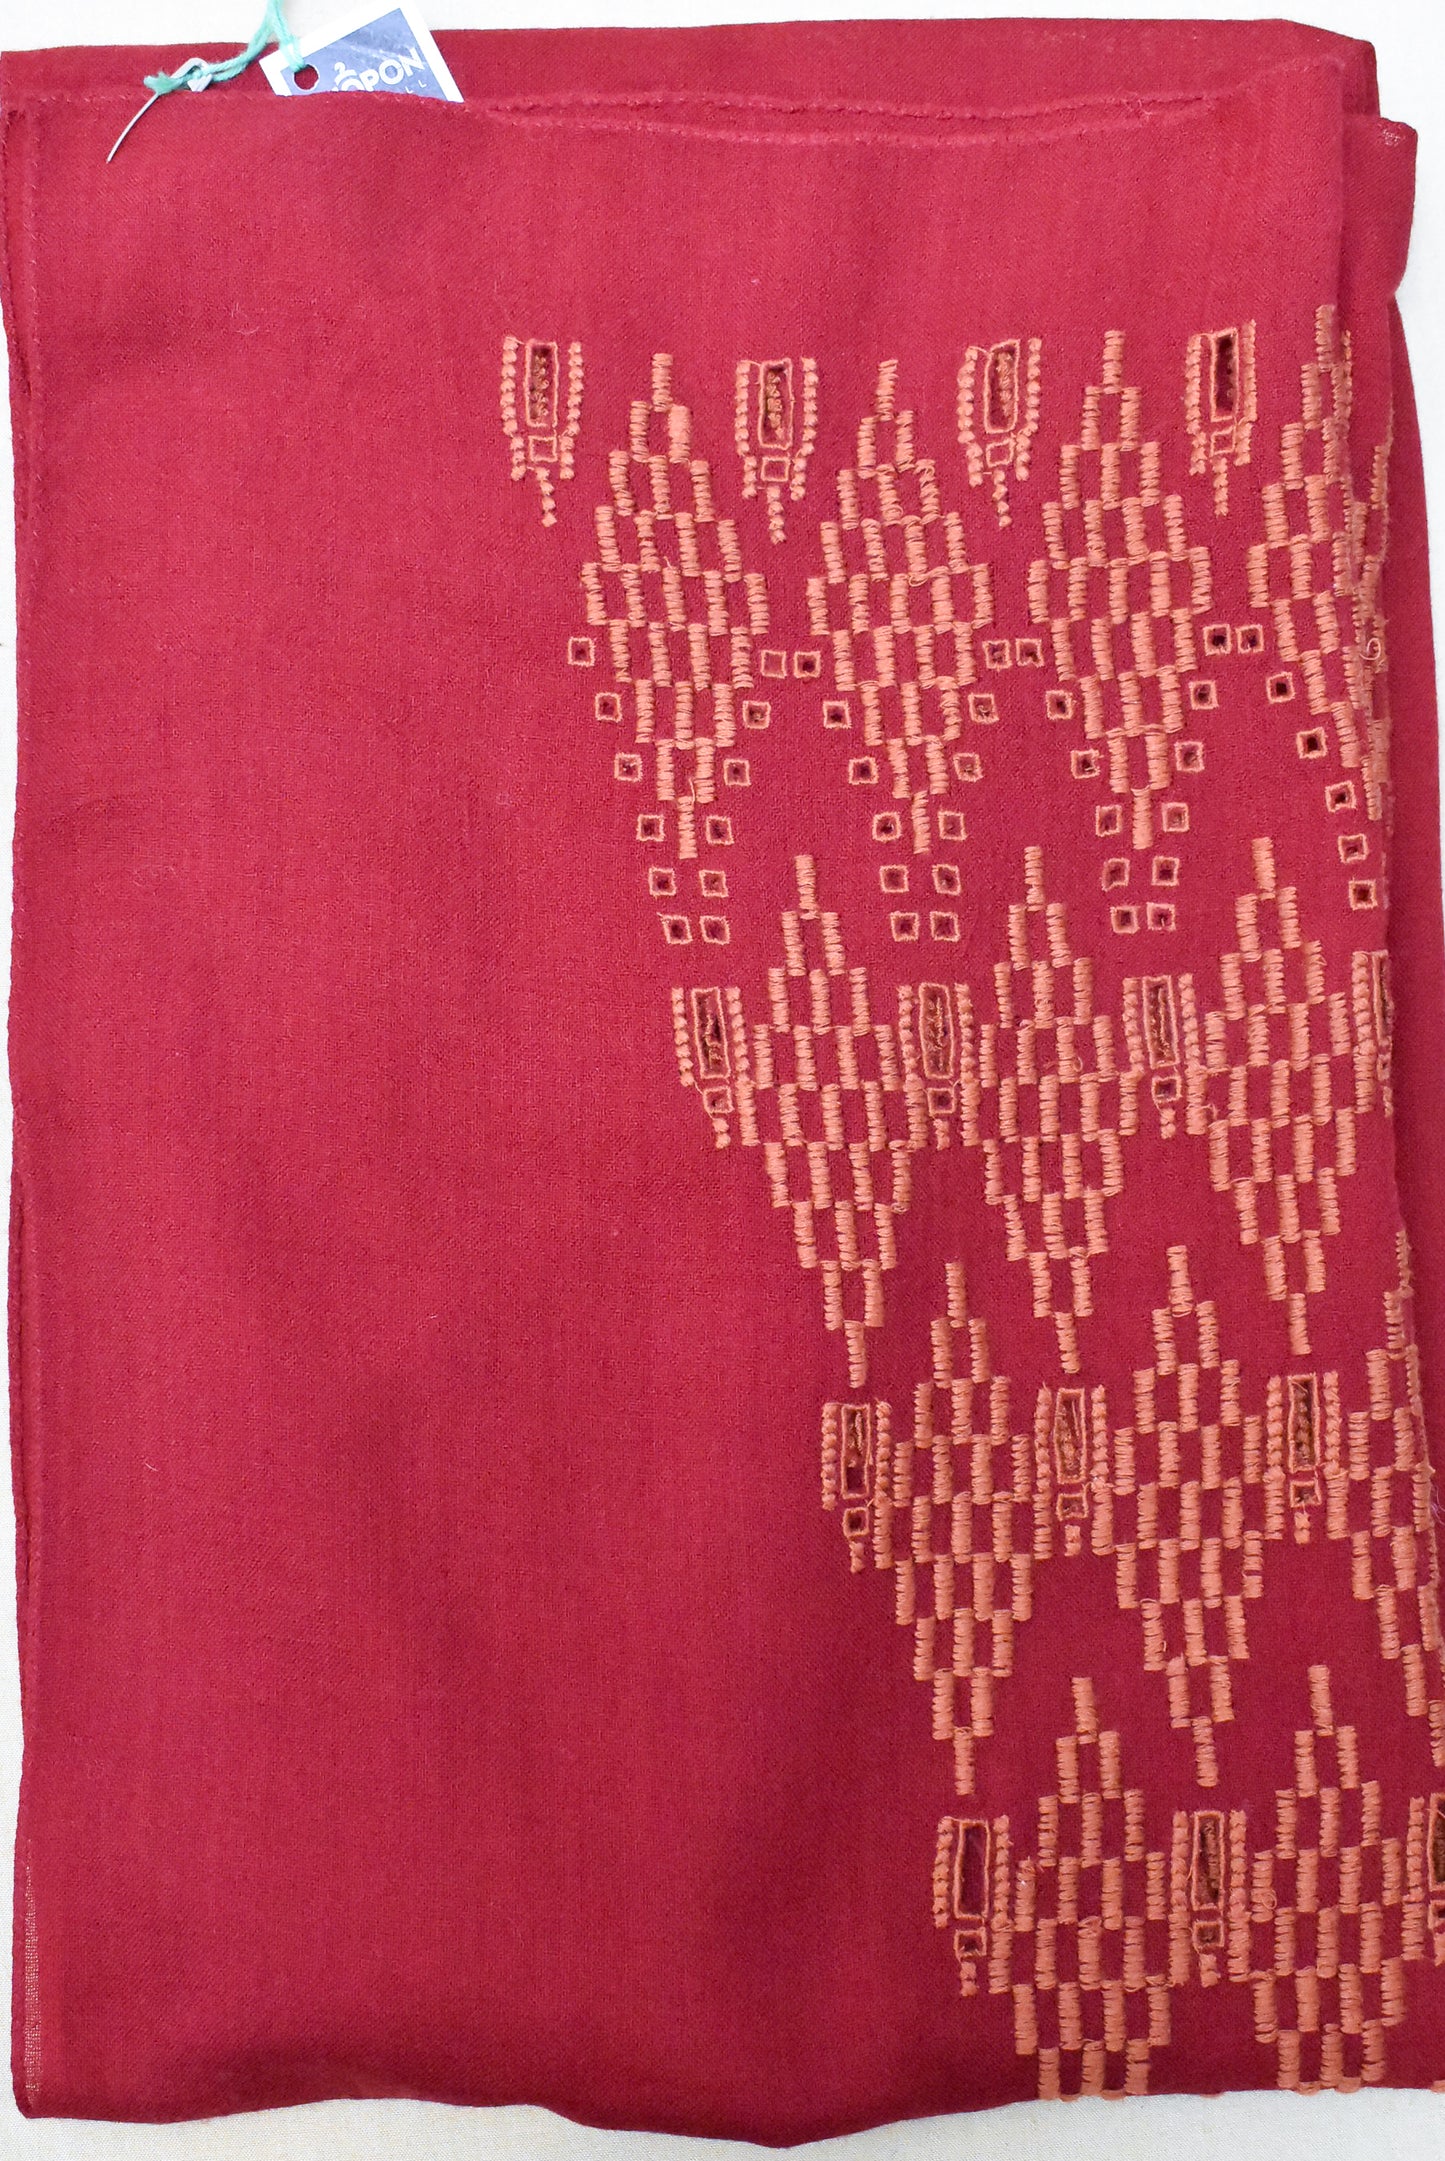 Long red embroidered scarf